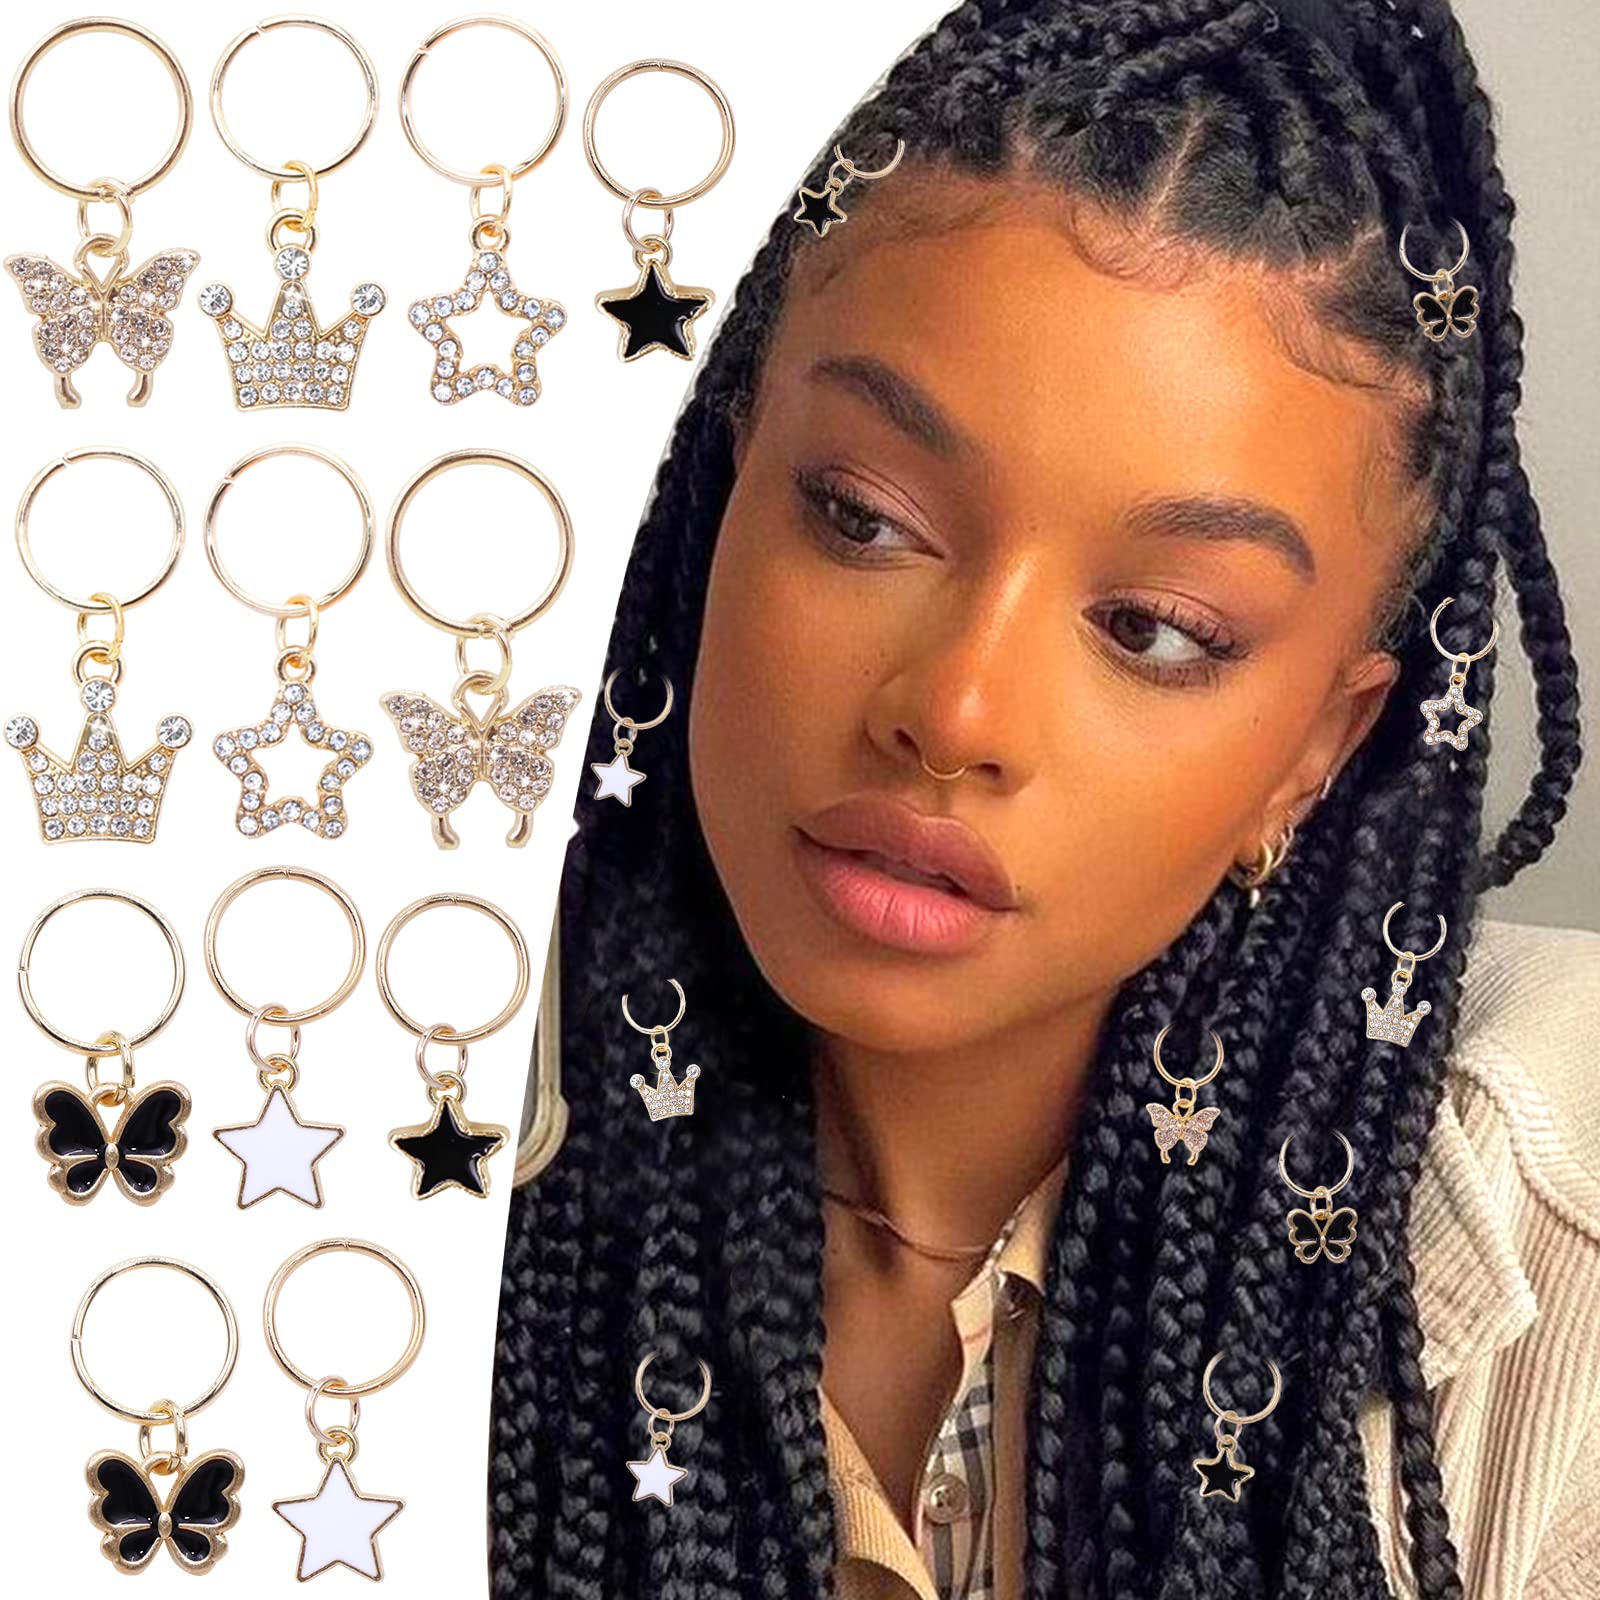  100 PCS Gold Hair Accessories Loc Hair Jewelry for Braids,  Dreadlock Accessories for Women and Girls Adjustable braid Cuffs Braiding  Hair Rings Decoration : Beauty & Personal Care